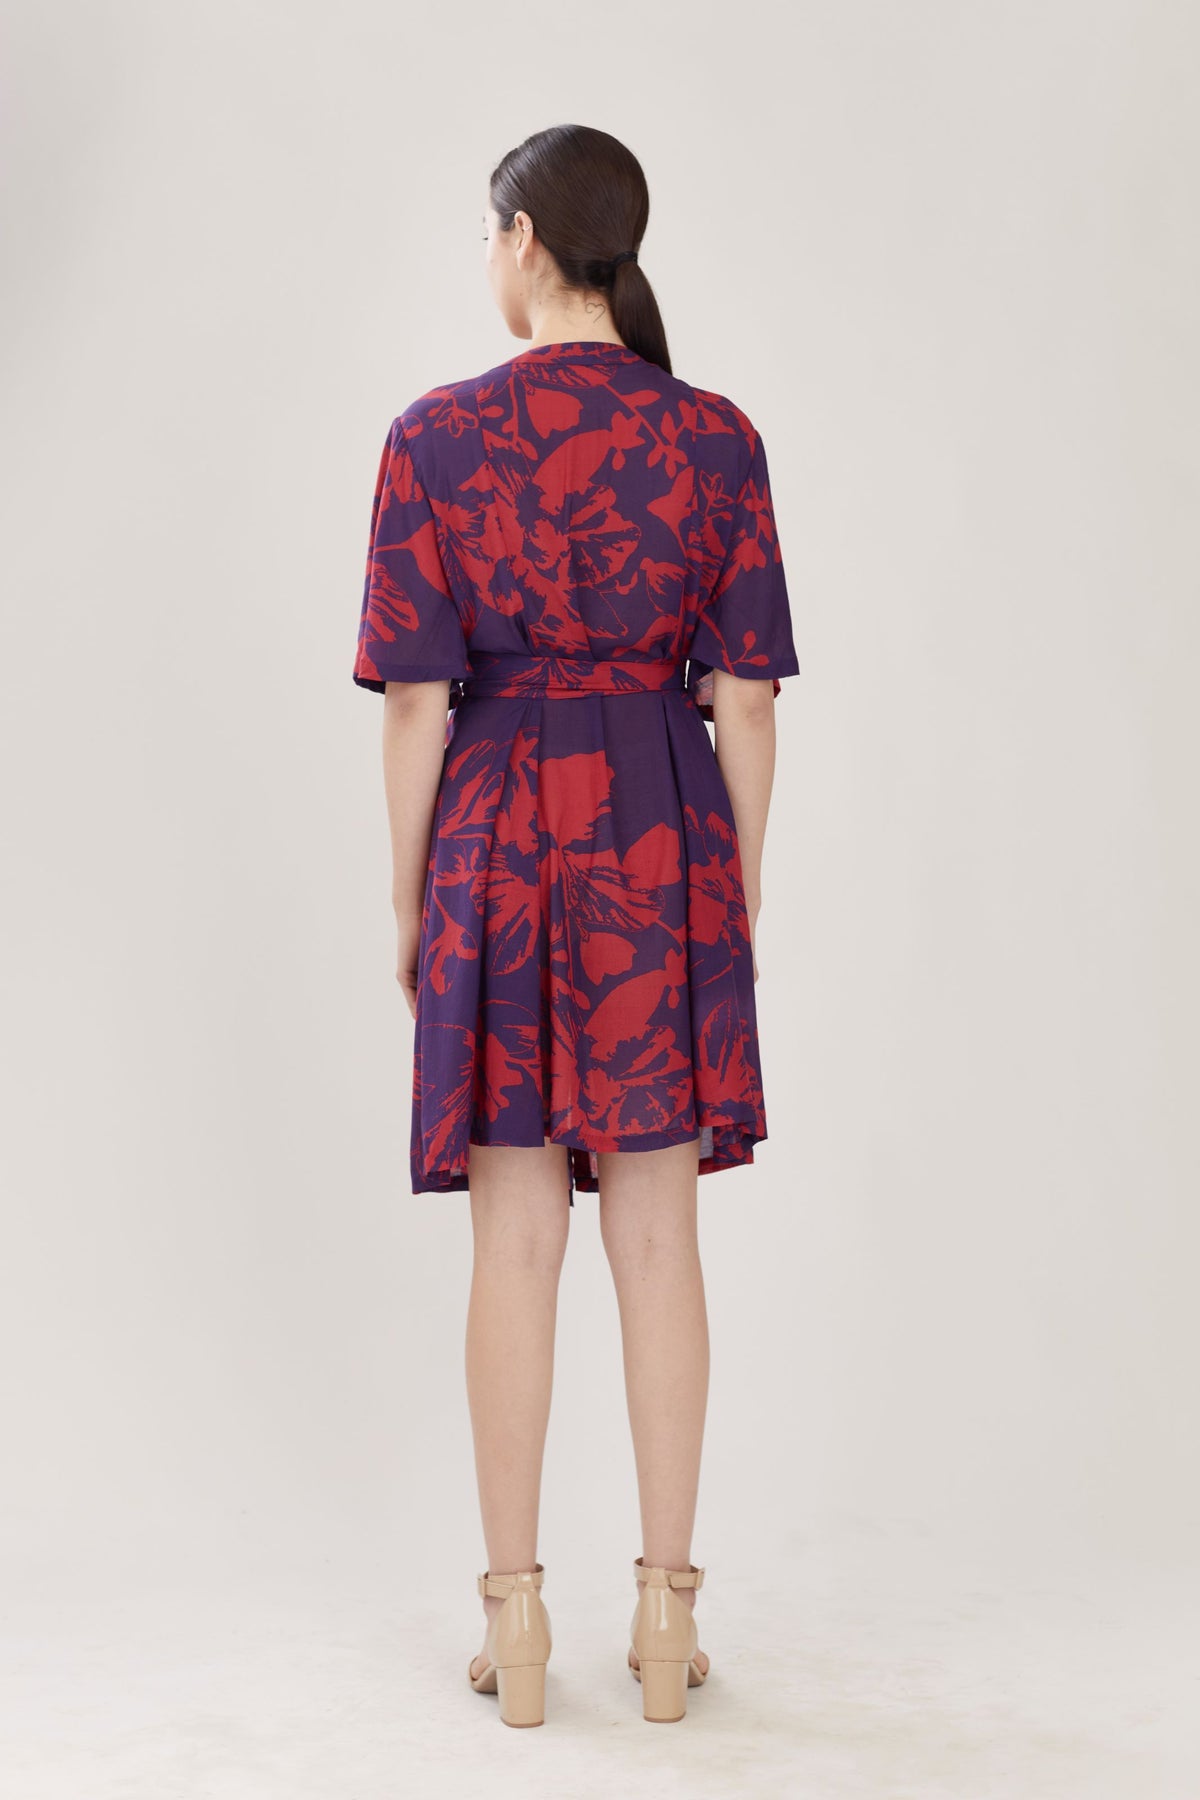 PURPLE AND RED FLORAL SHIRT DRESS